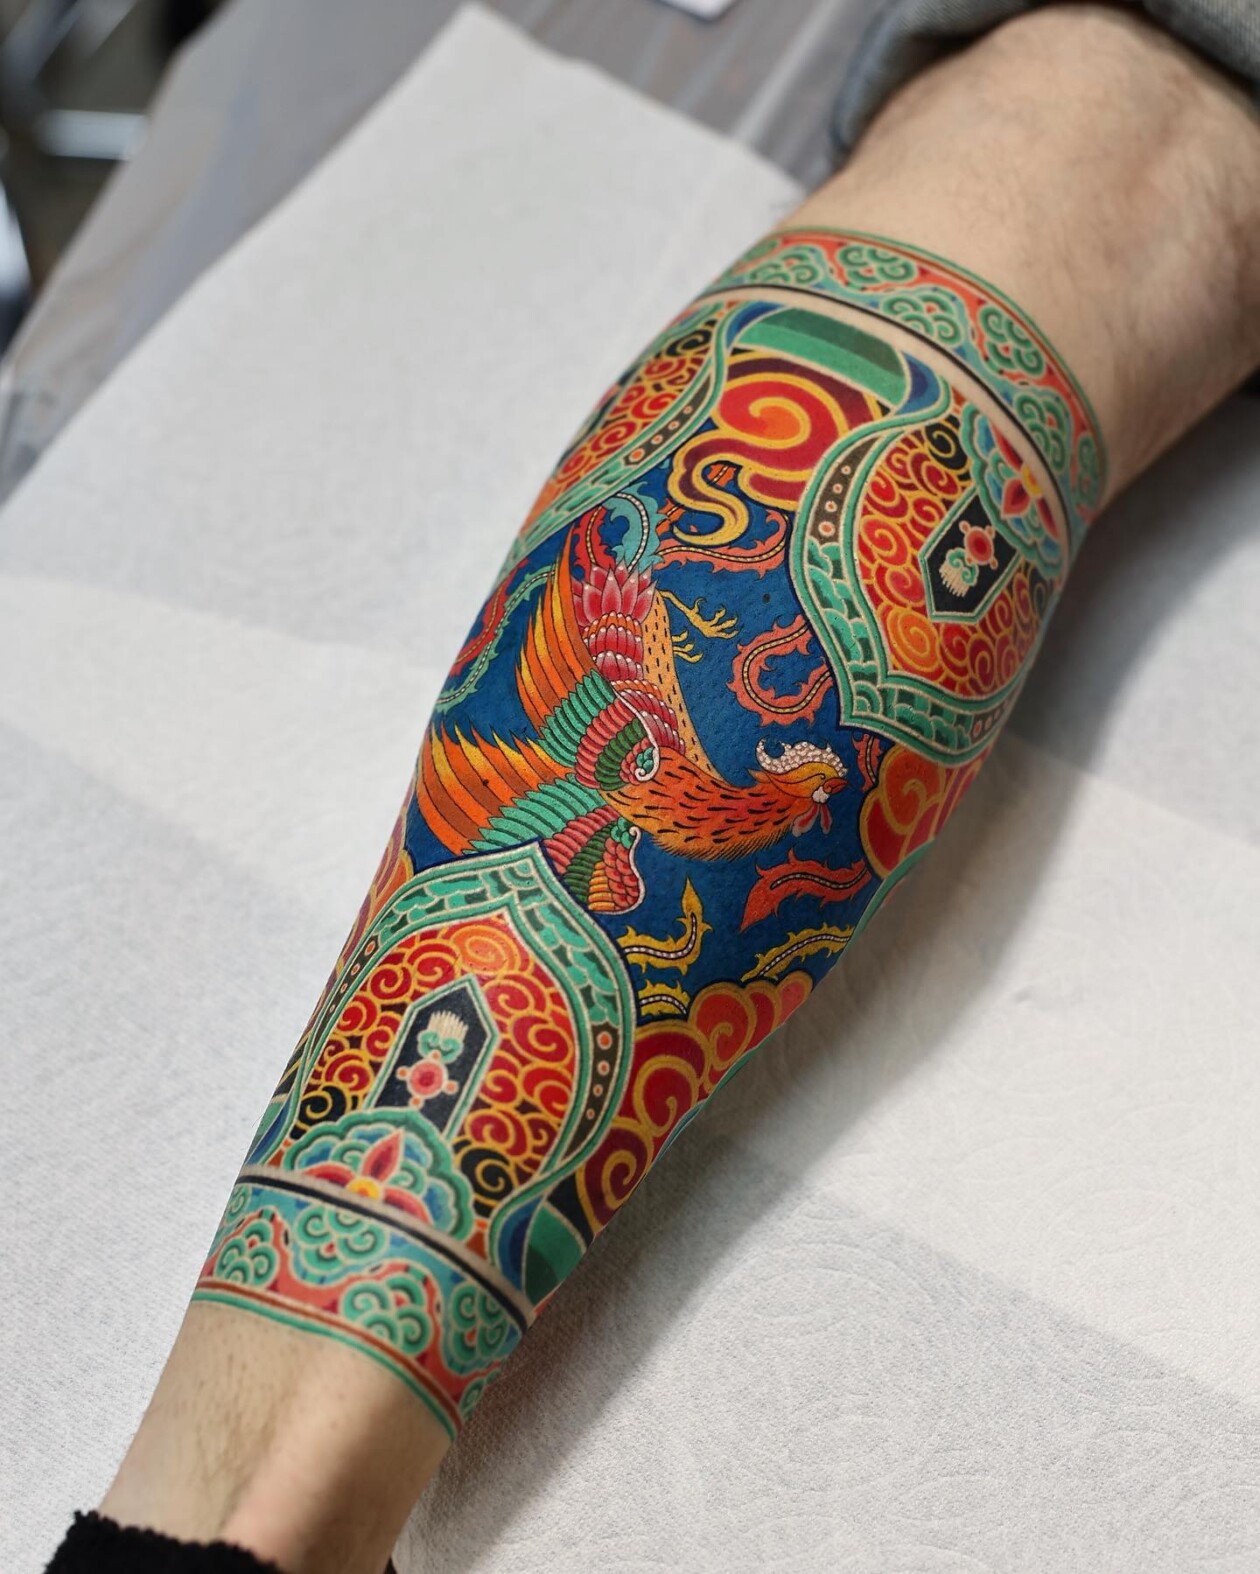 Vibrant Tattoos With Densely Layered Patterns By Korean Artist Pittakkm (7)